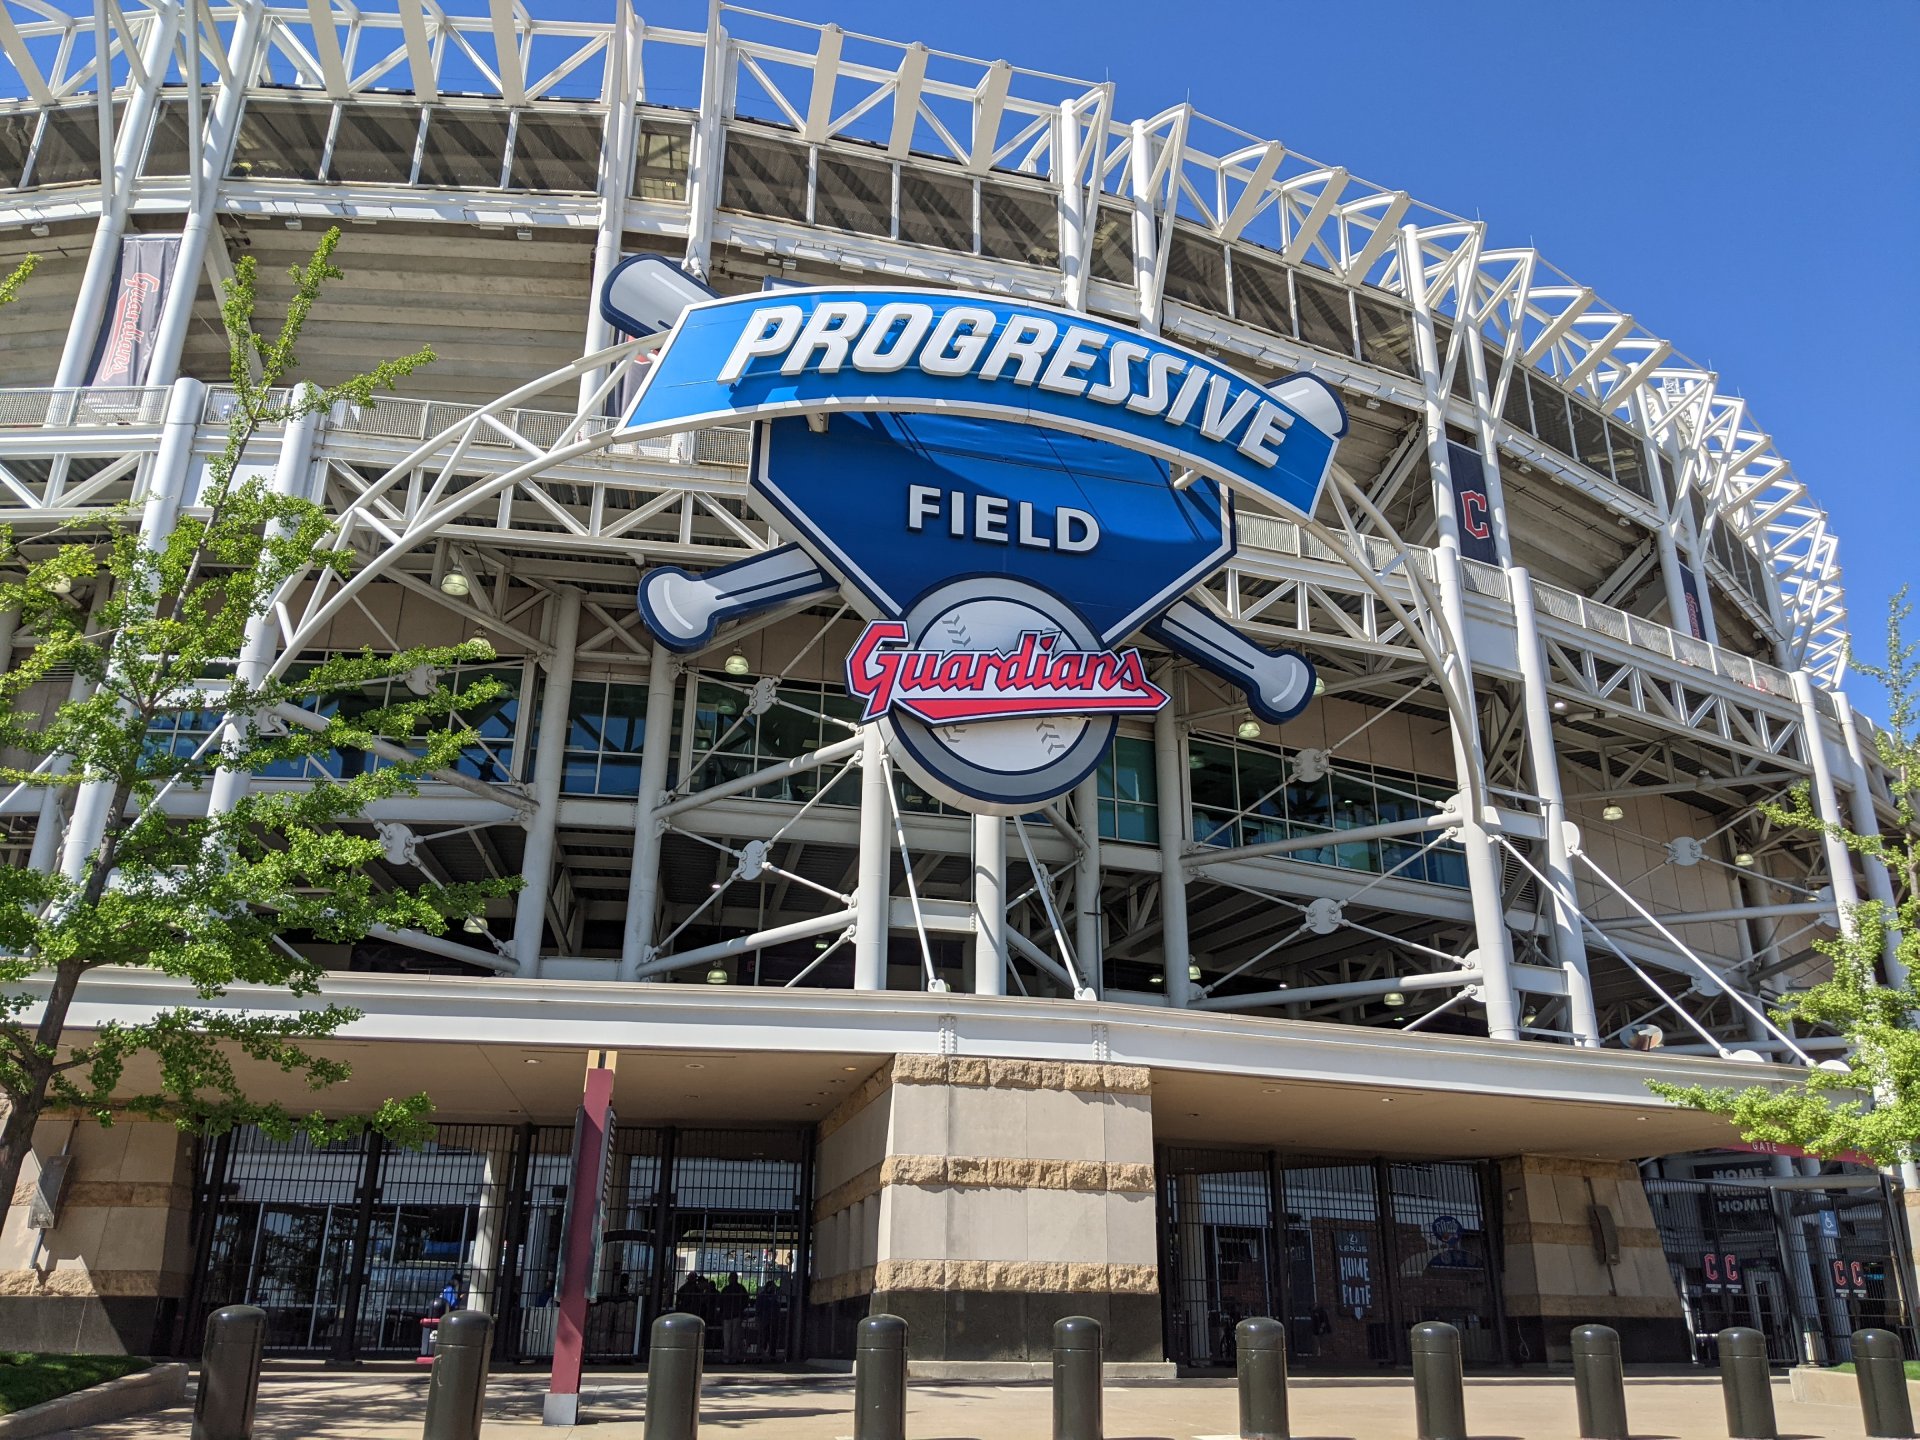 Progressive Field has been home to the Cleveland franchise since 1994.